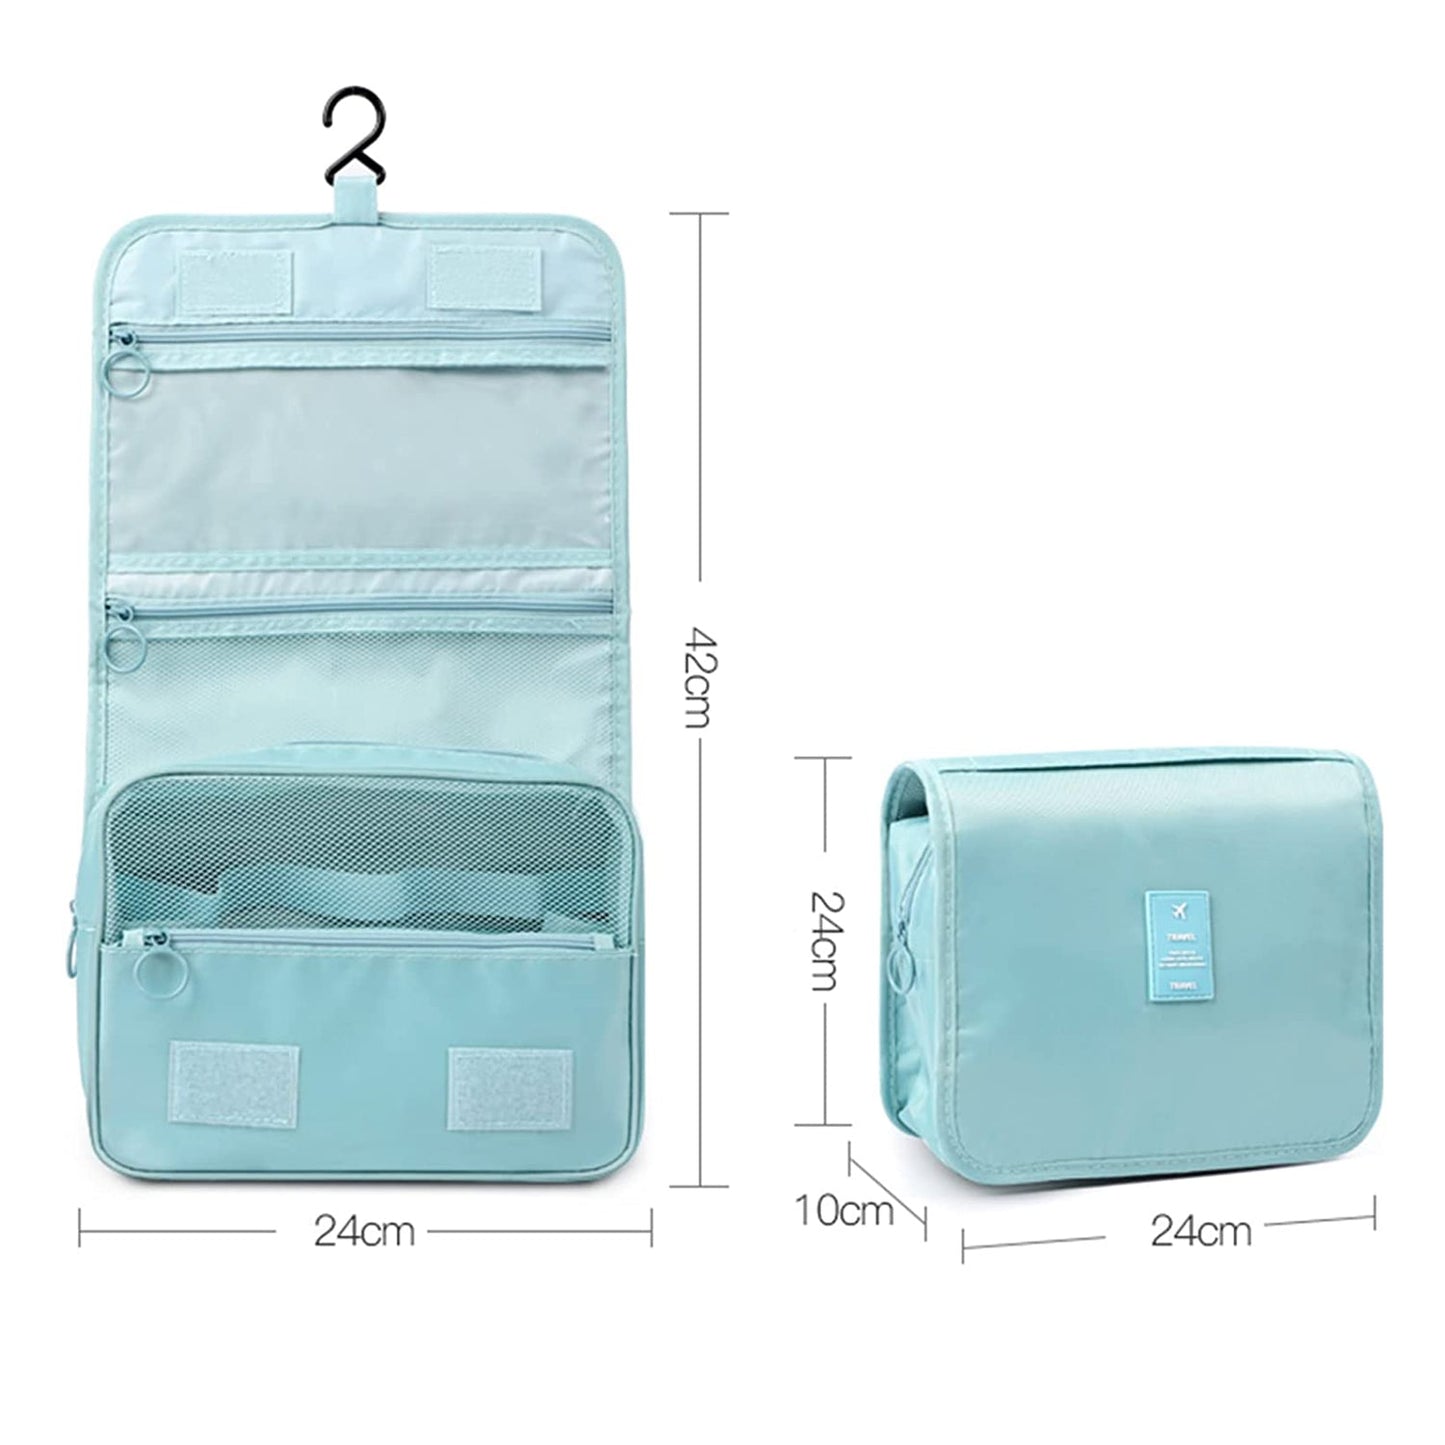 7292 Men's and Women's Waterproof Foldable Multifunction Portable Travel Toiletry Kit Cosmetic Makeup Pouch Organizer Bag JK Trends